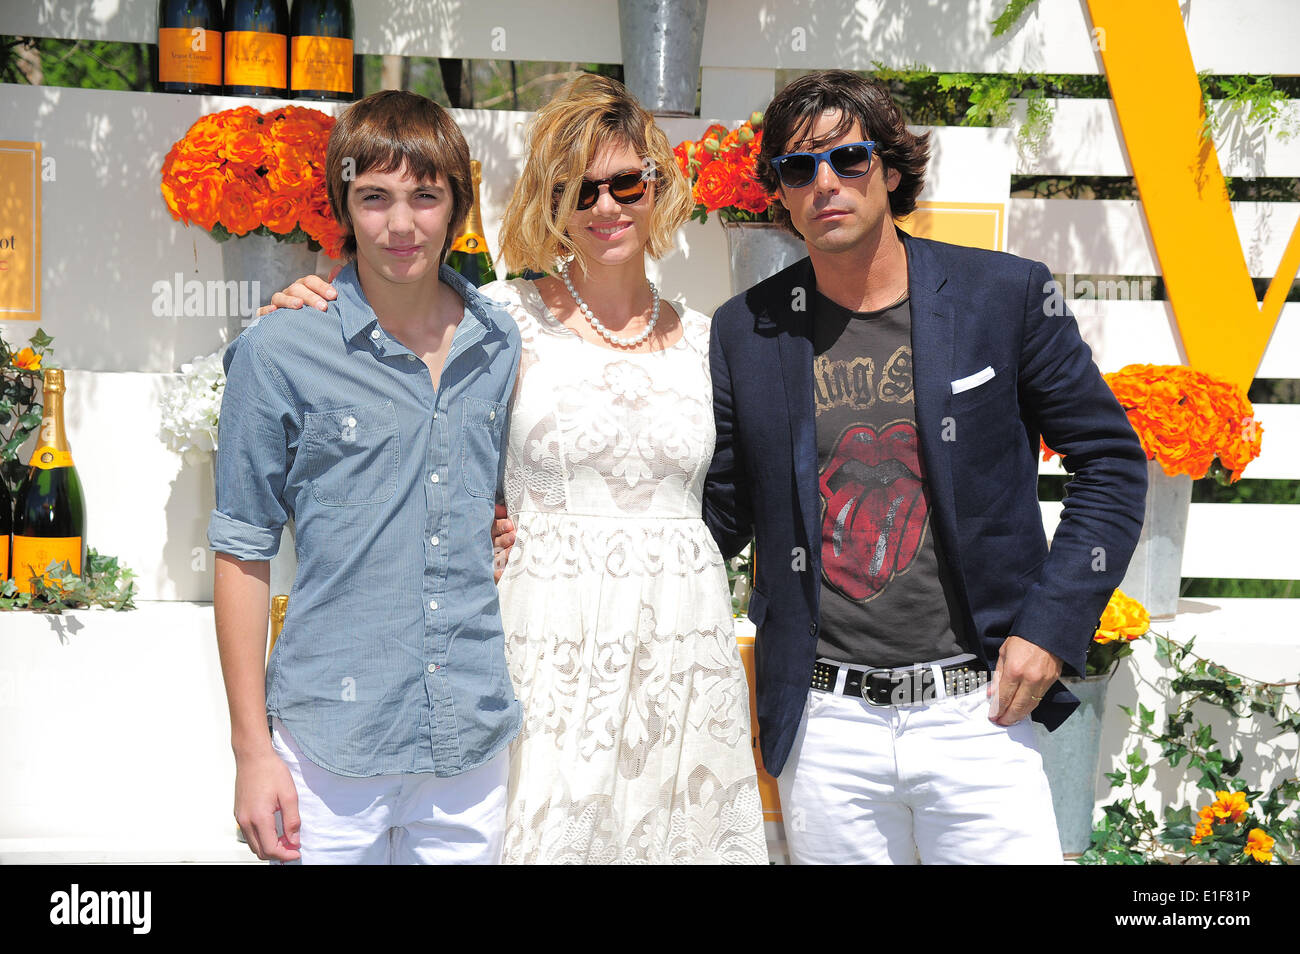 Jersey City, NJ. 31st May 2014. Hilario Figueras, Delfina Blaquier, and Nacho Figueras  attends the seventh annual Veuve Clicquot Polo Classic at the Liberty State Park. Stock Photo